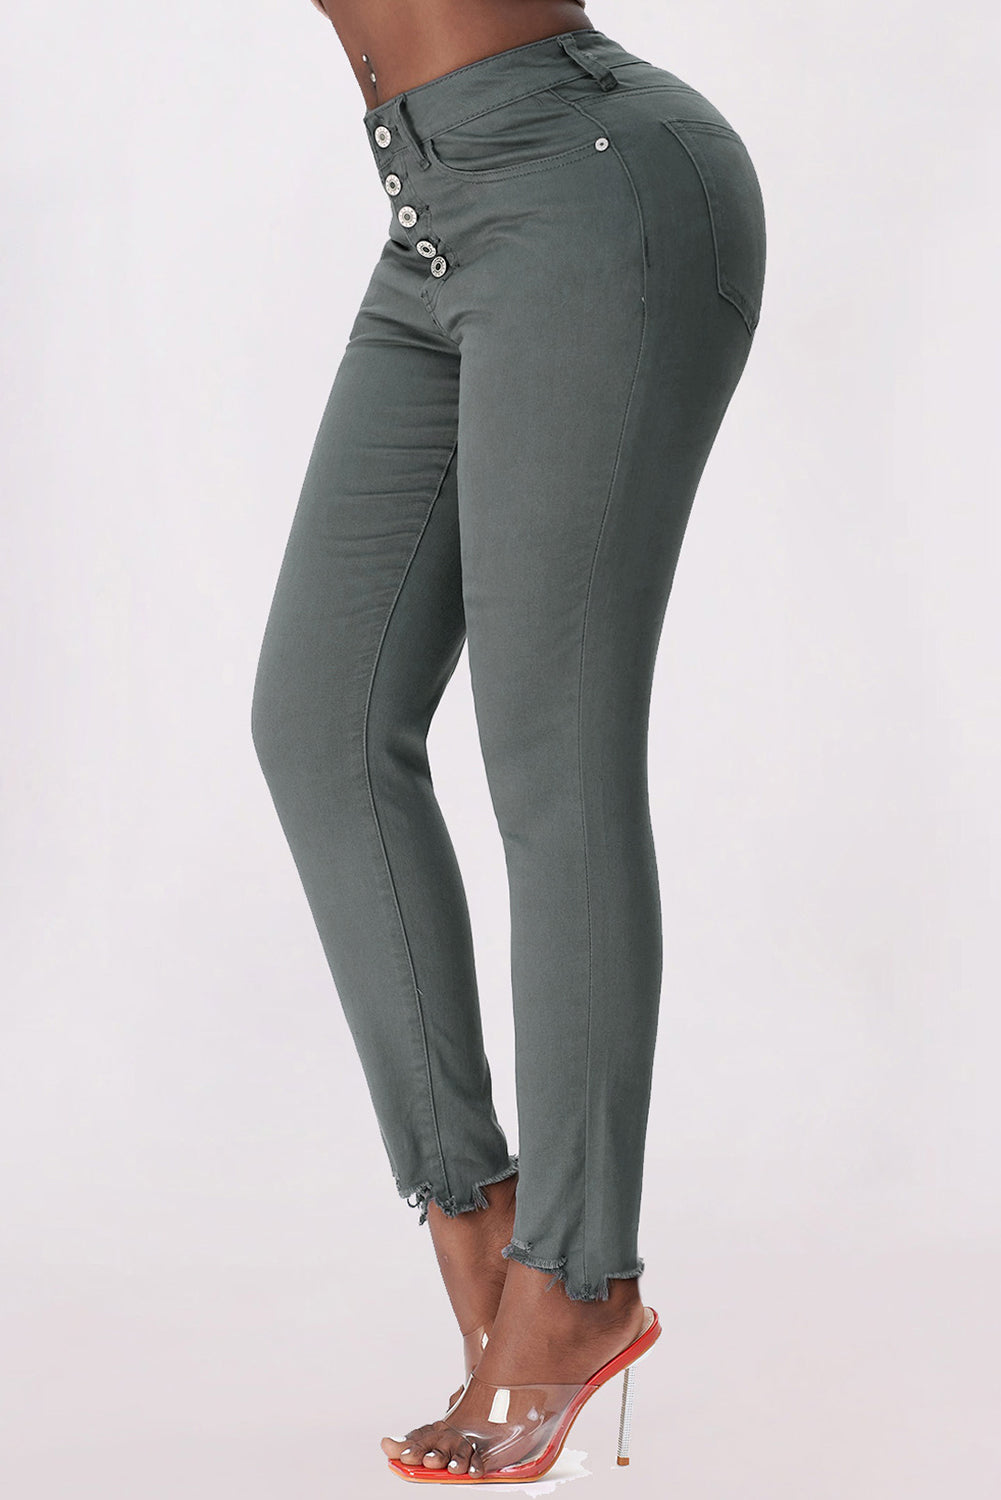 Button Fly Hem Detail Skinny Jeans Print on any thing USA/STOD clothes